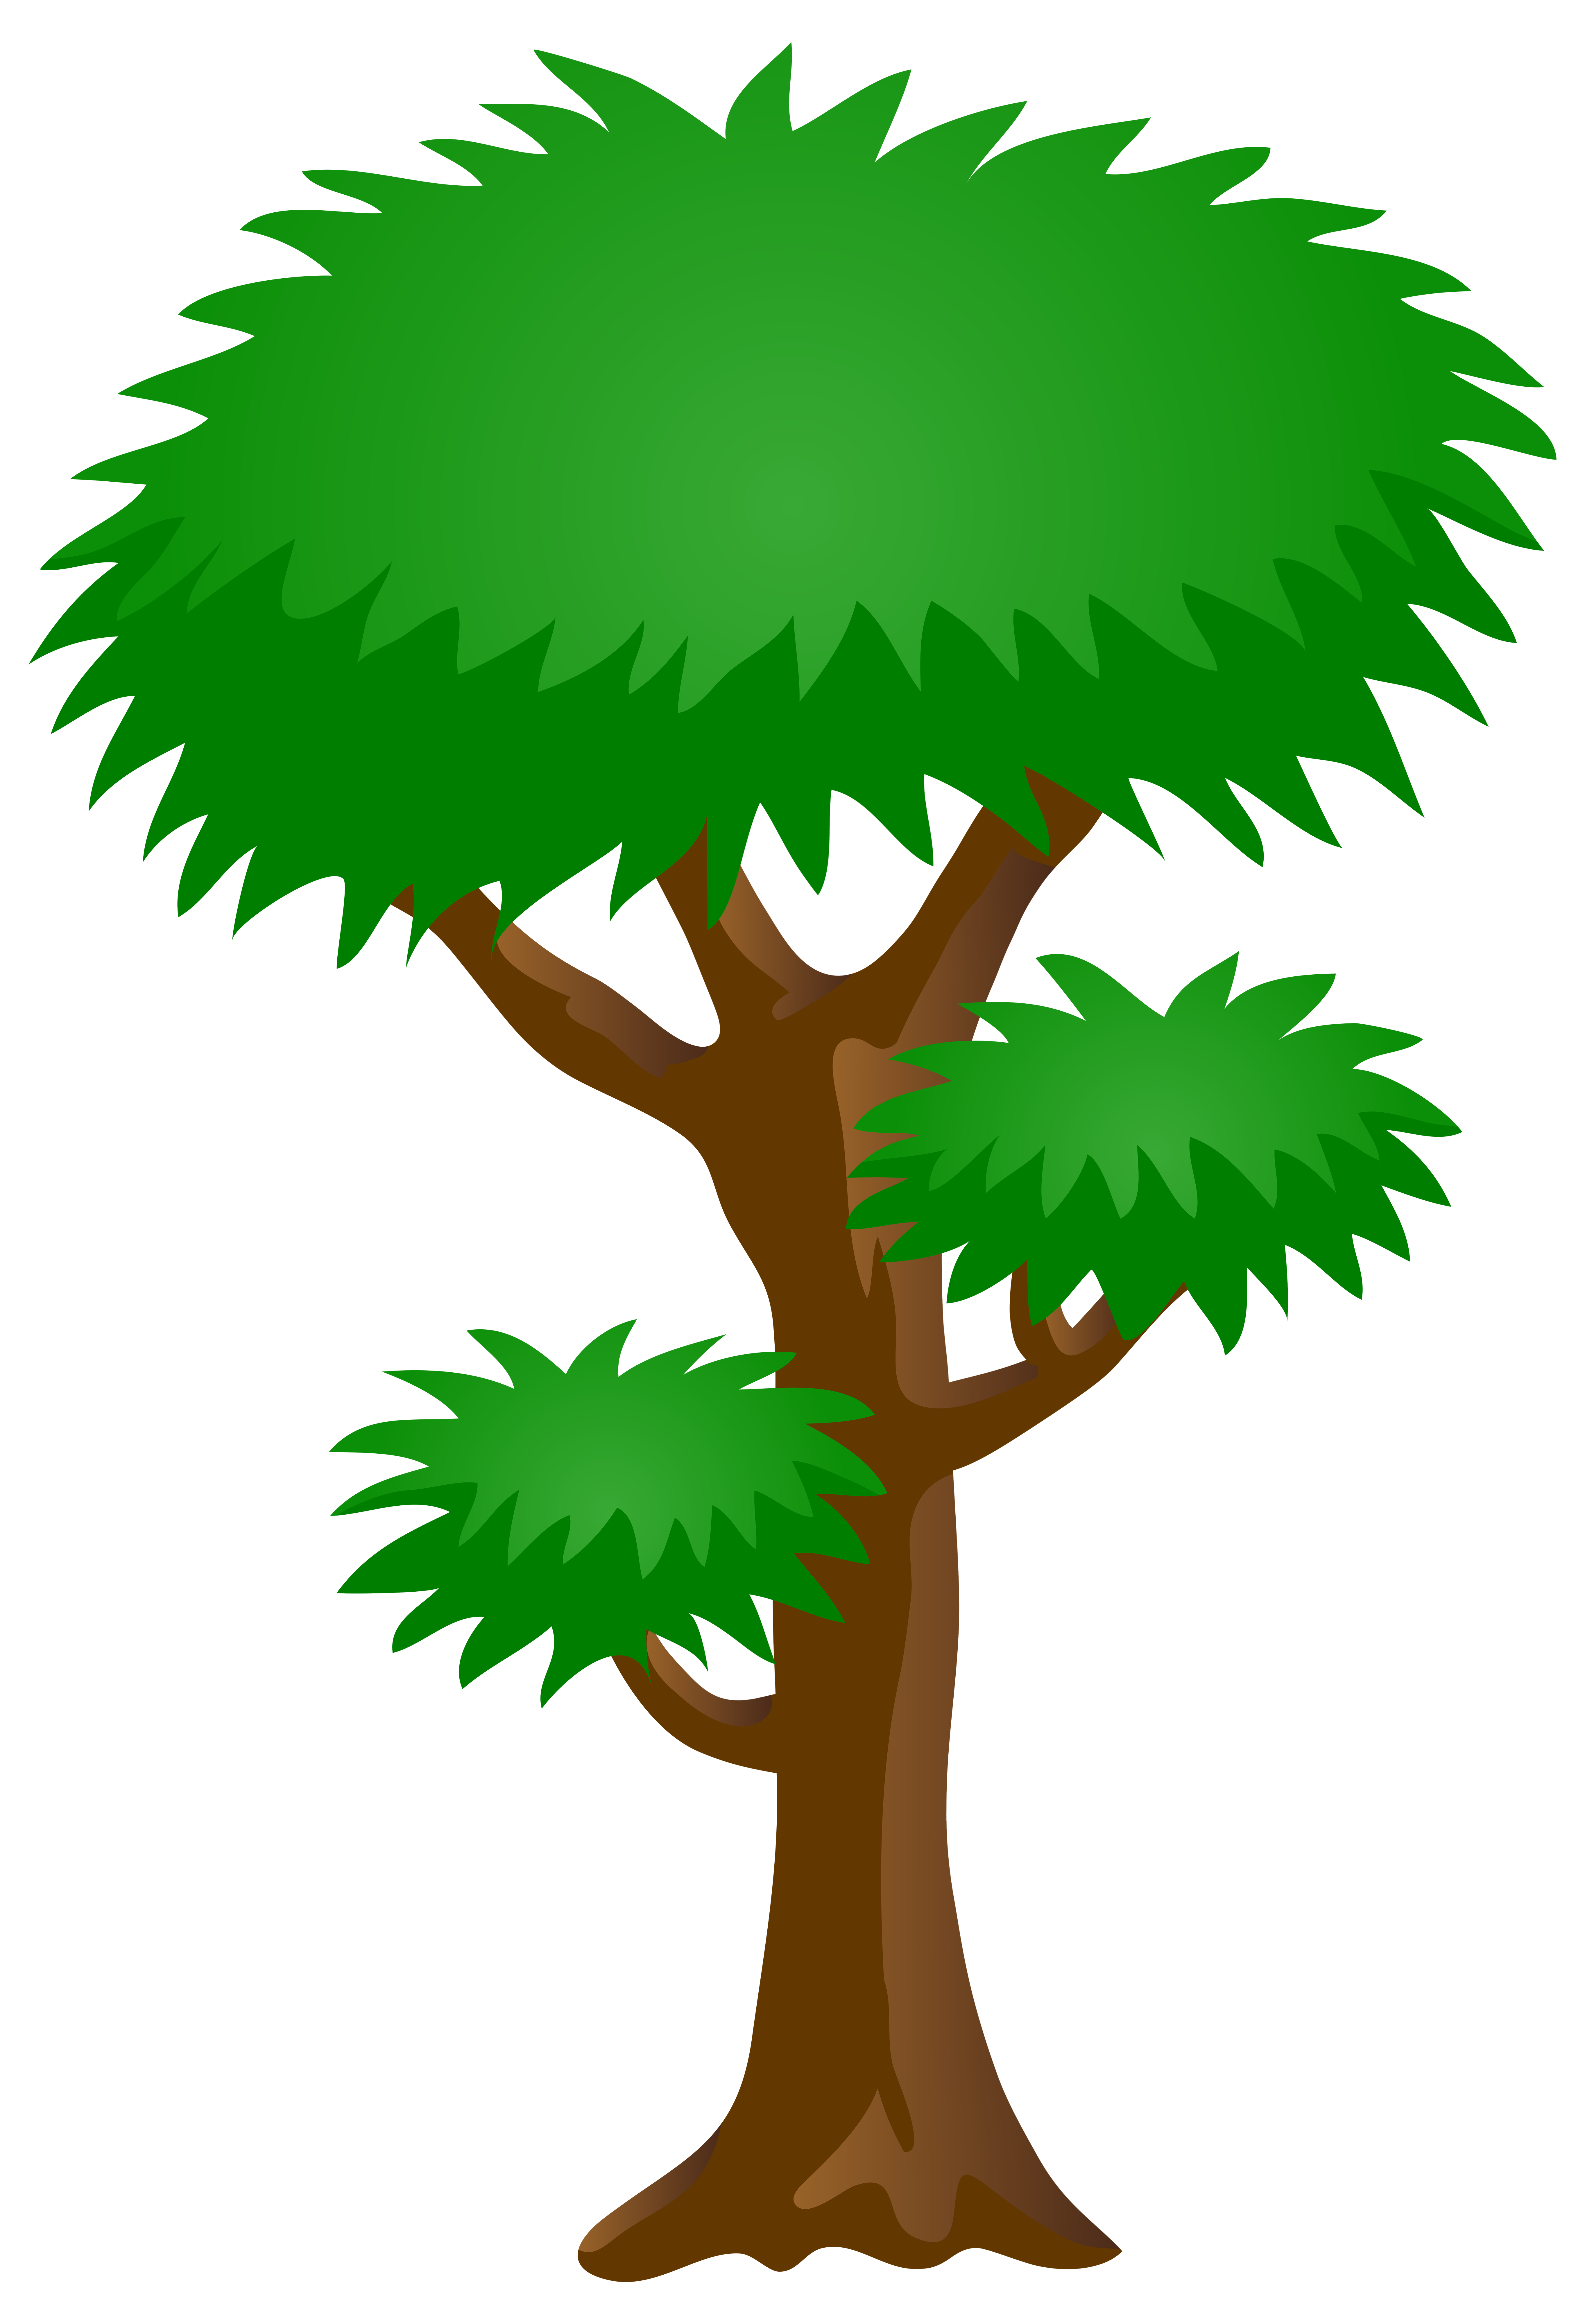 Green Realistic Tree Png Clip Art Best Web Clipart Images